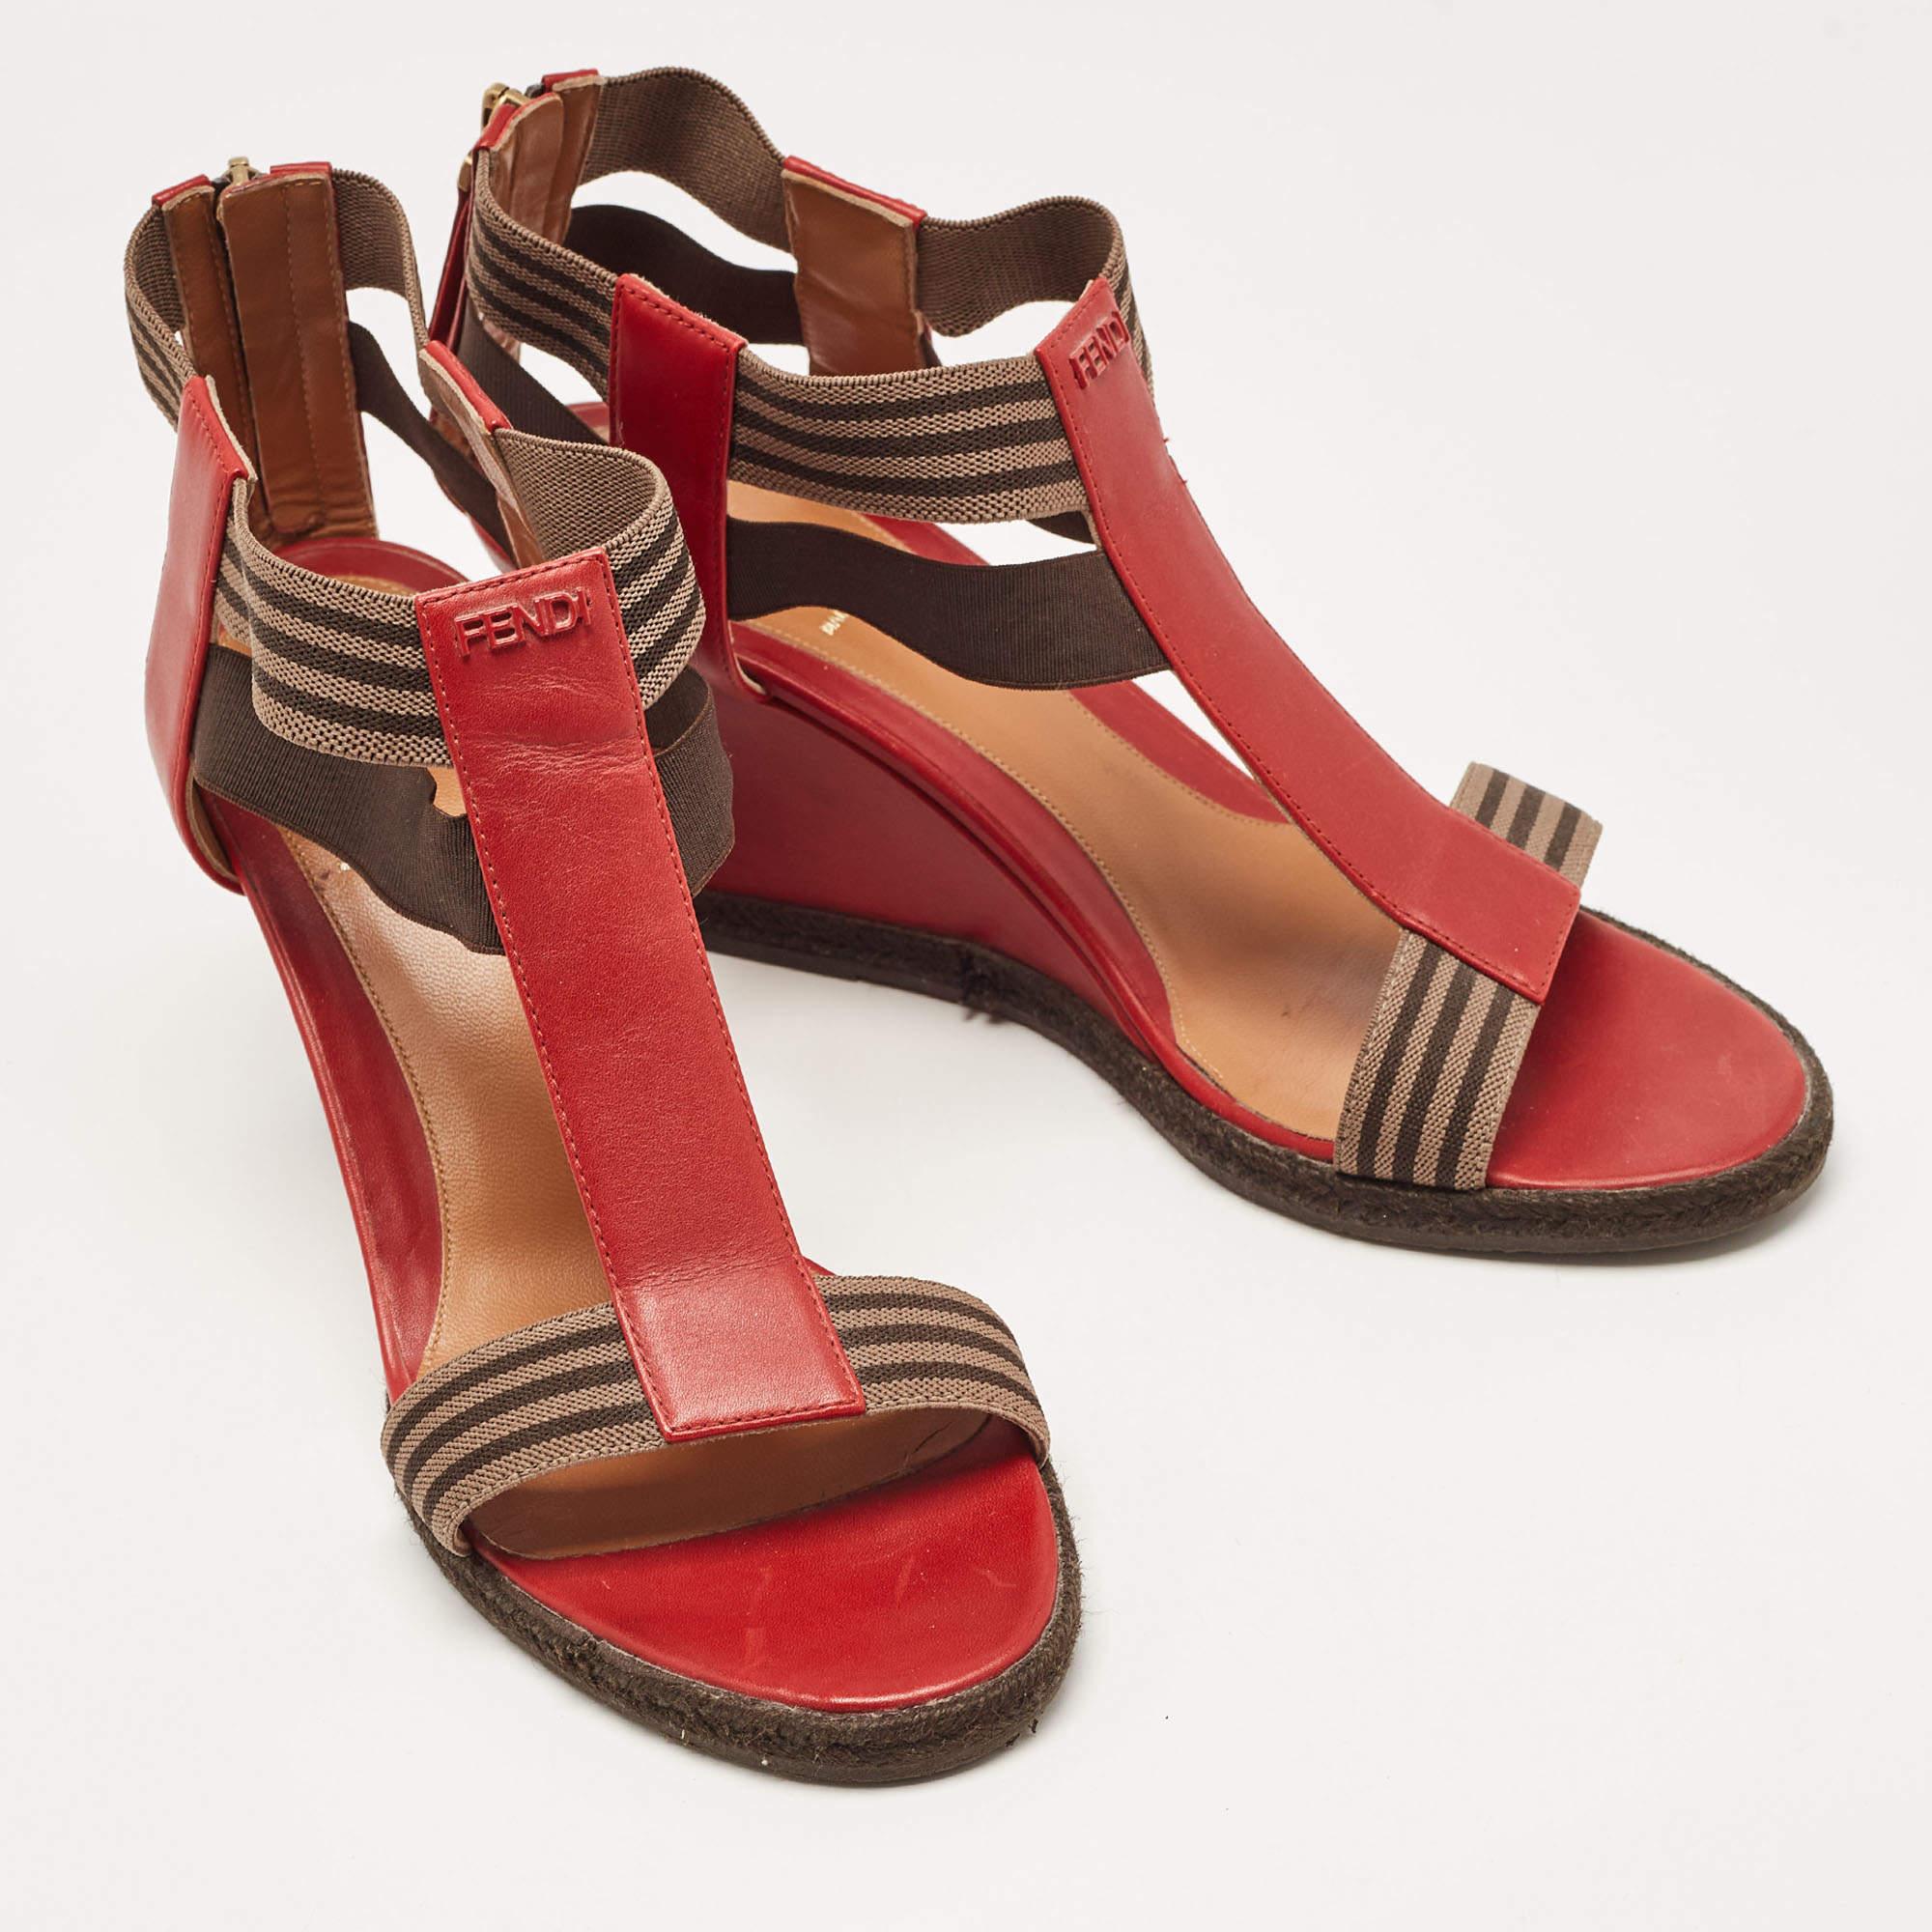 Fendi Red/Brown Leather and Elastic T-Strap Espadrille Wedge Sandals Size 39 In Excellent Condition For Sale In Dubai, Al Qouz 2